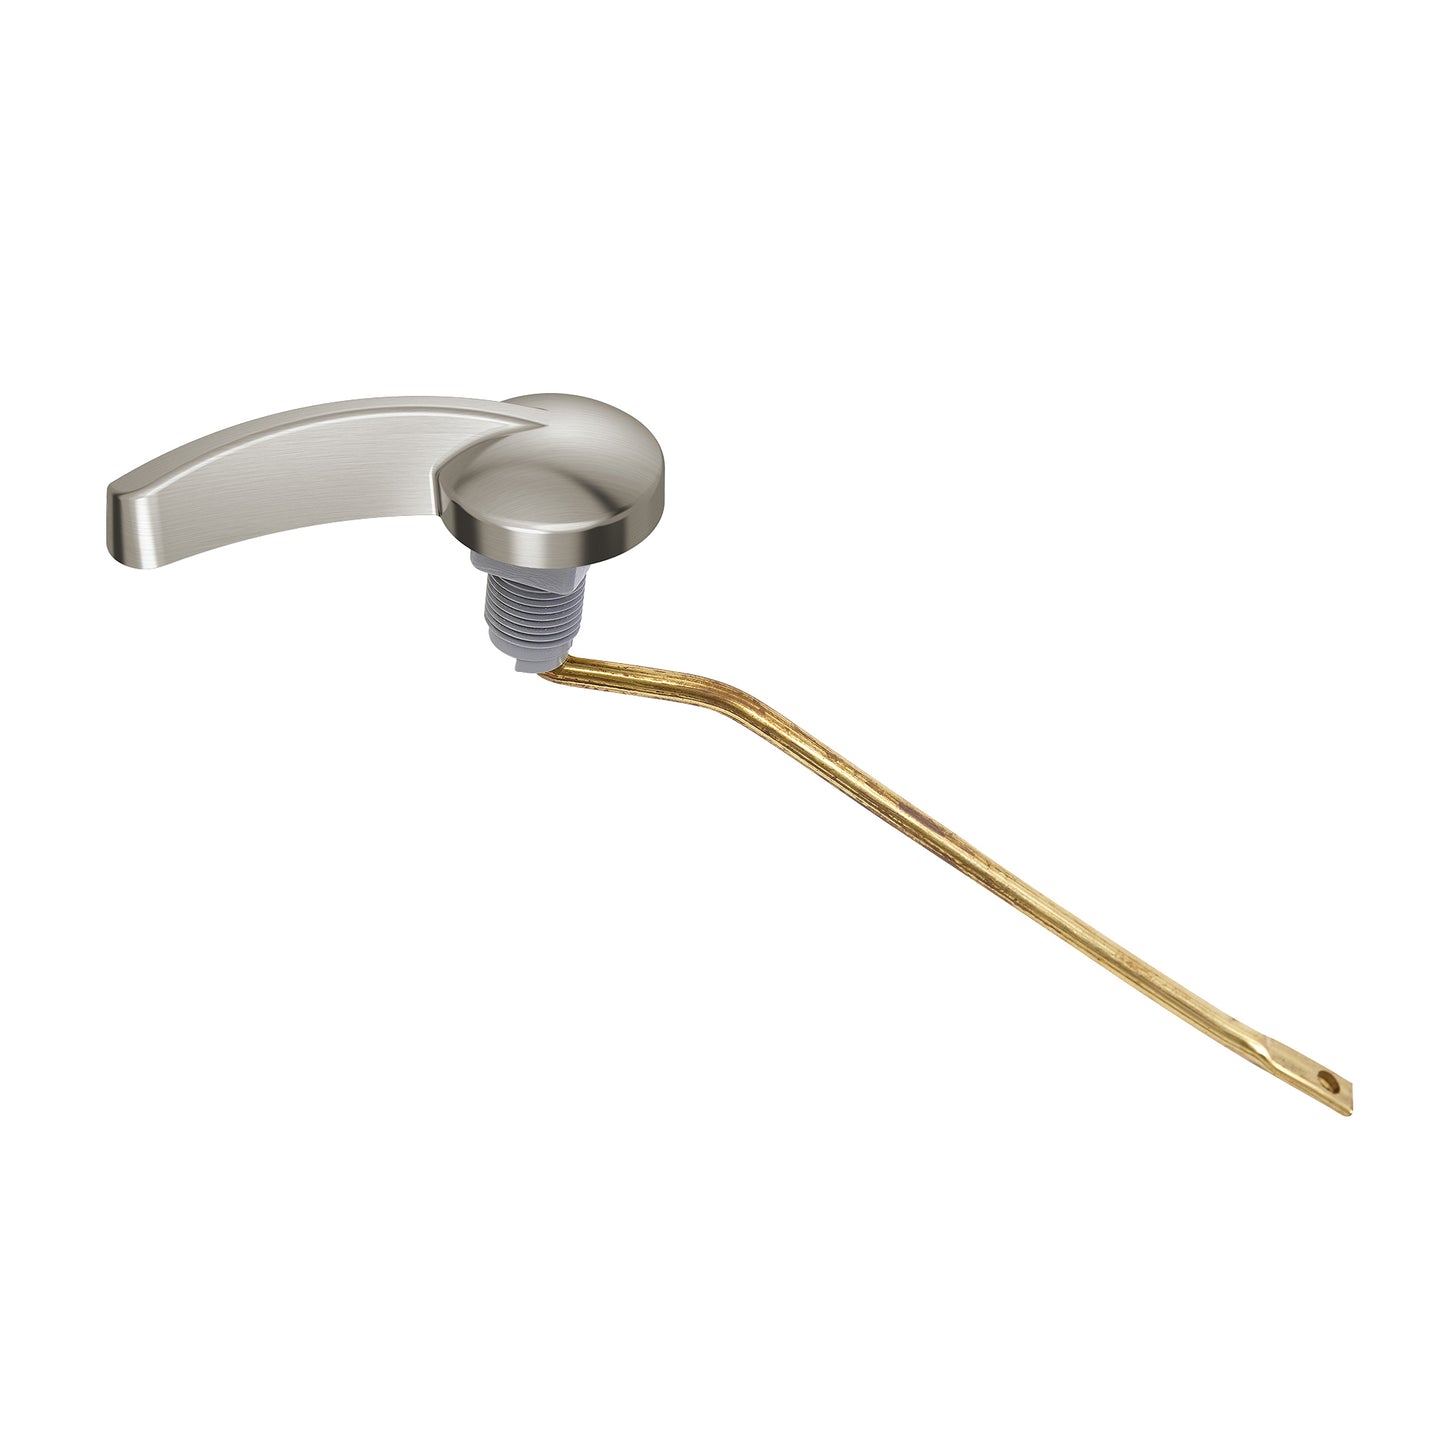 7381232-200.2950A - Left-Hand Trip Lever for Champion Pro 4225A Toilet Tank - Brushed Nickel